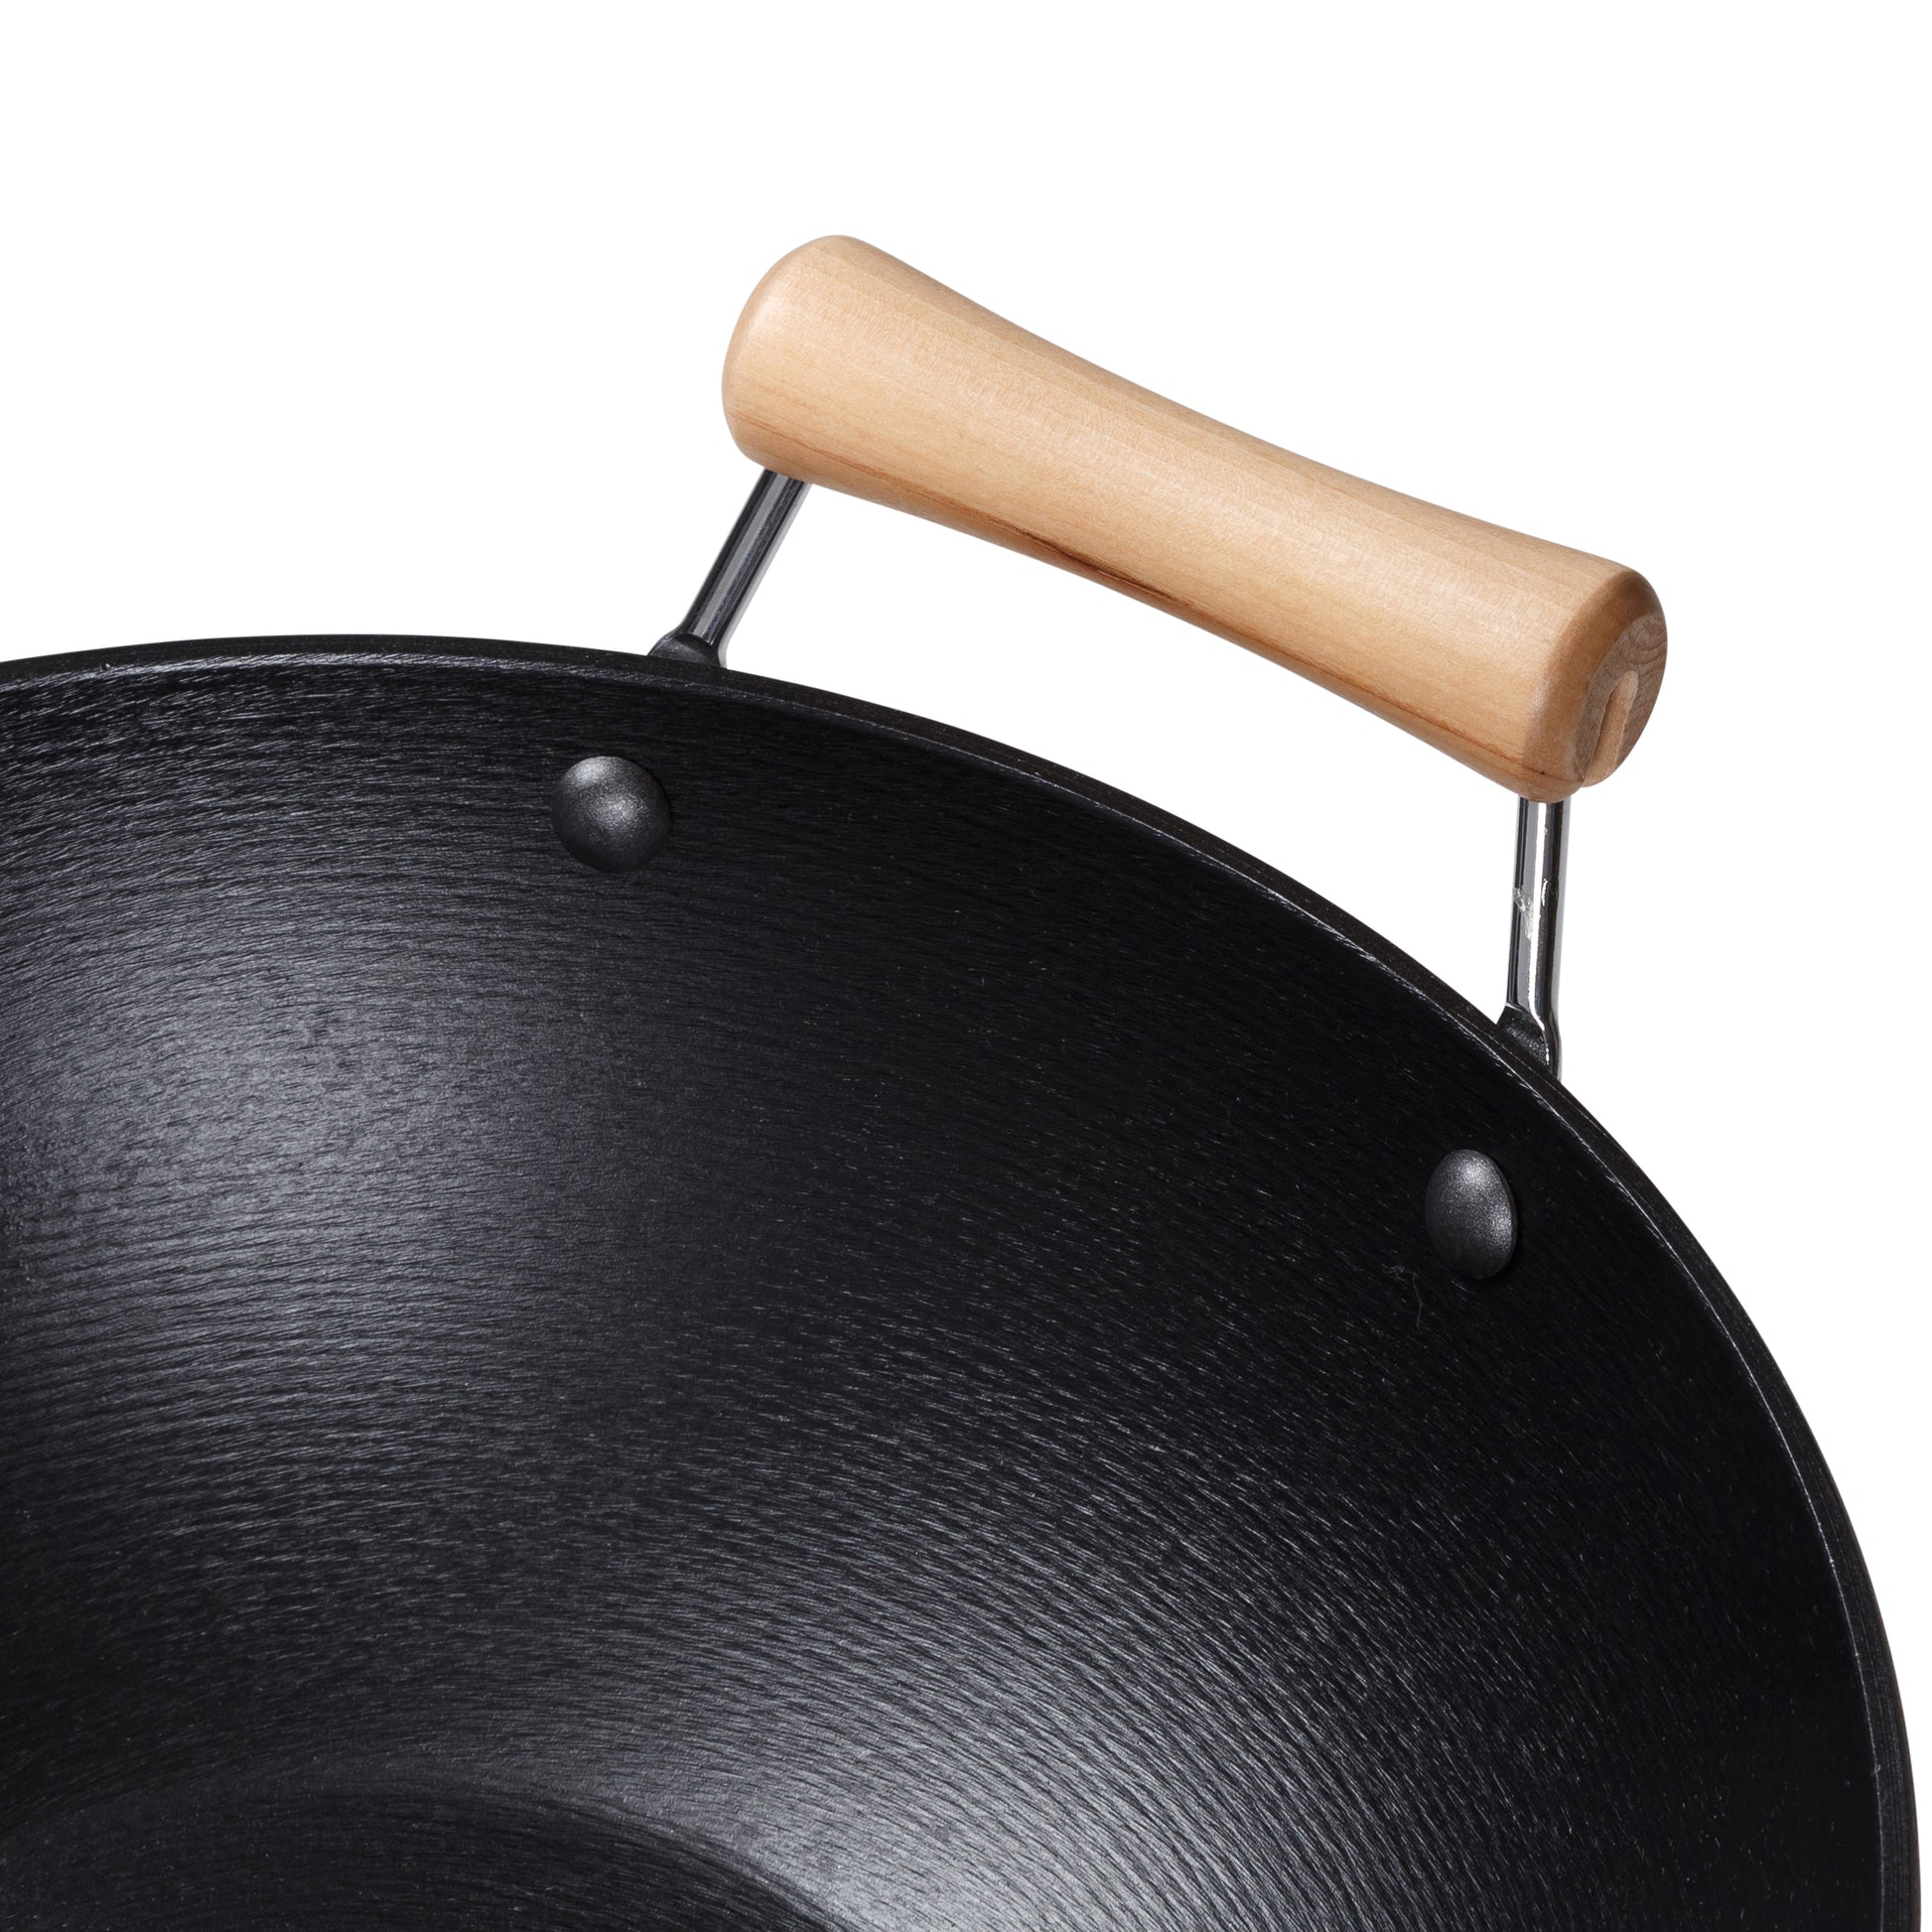 Backcountry Iron 14 inch Cast Iron Wok with Flat Base and Handles